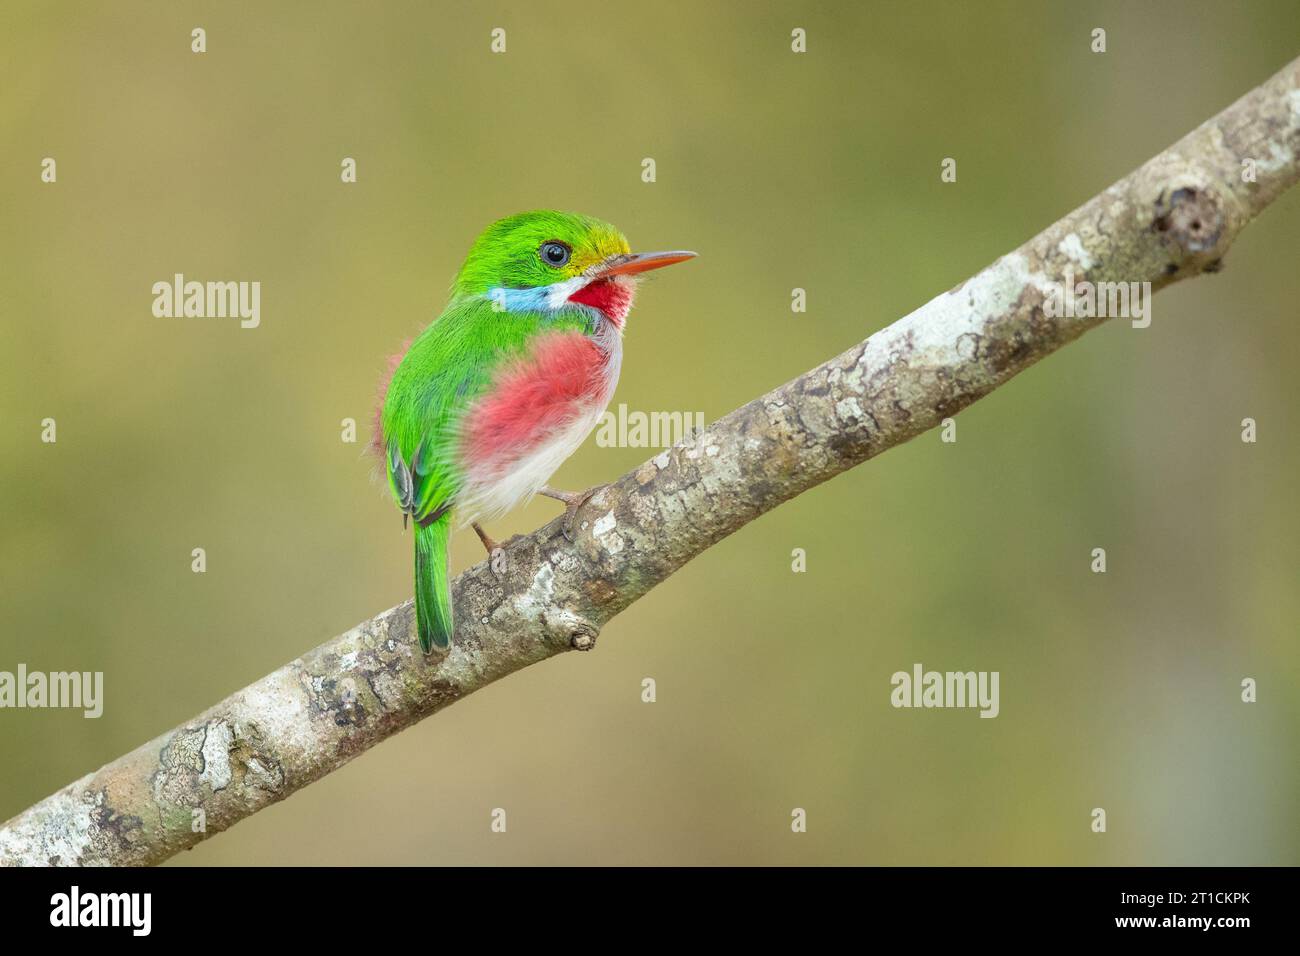 Cuban tody (Todus multicolor) is a bird species in the family Todidae that is restricted to Cuba and the adjacent islands Stock Photo